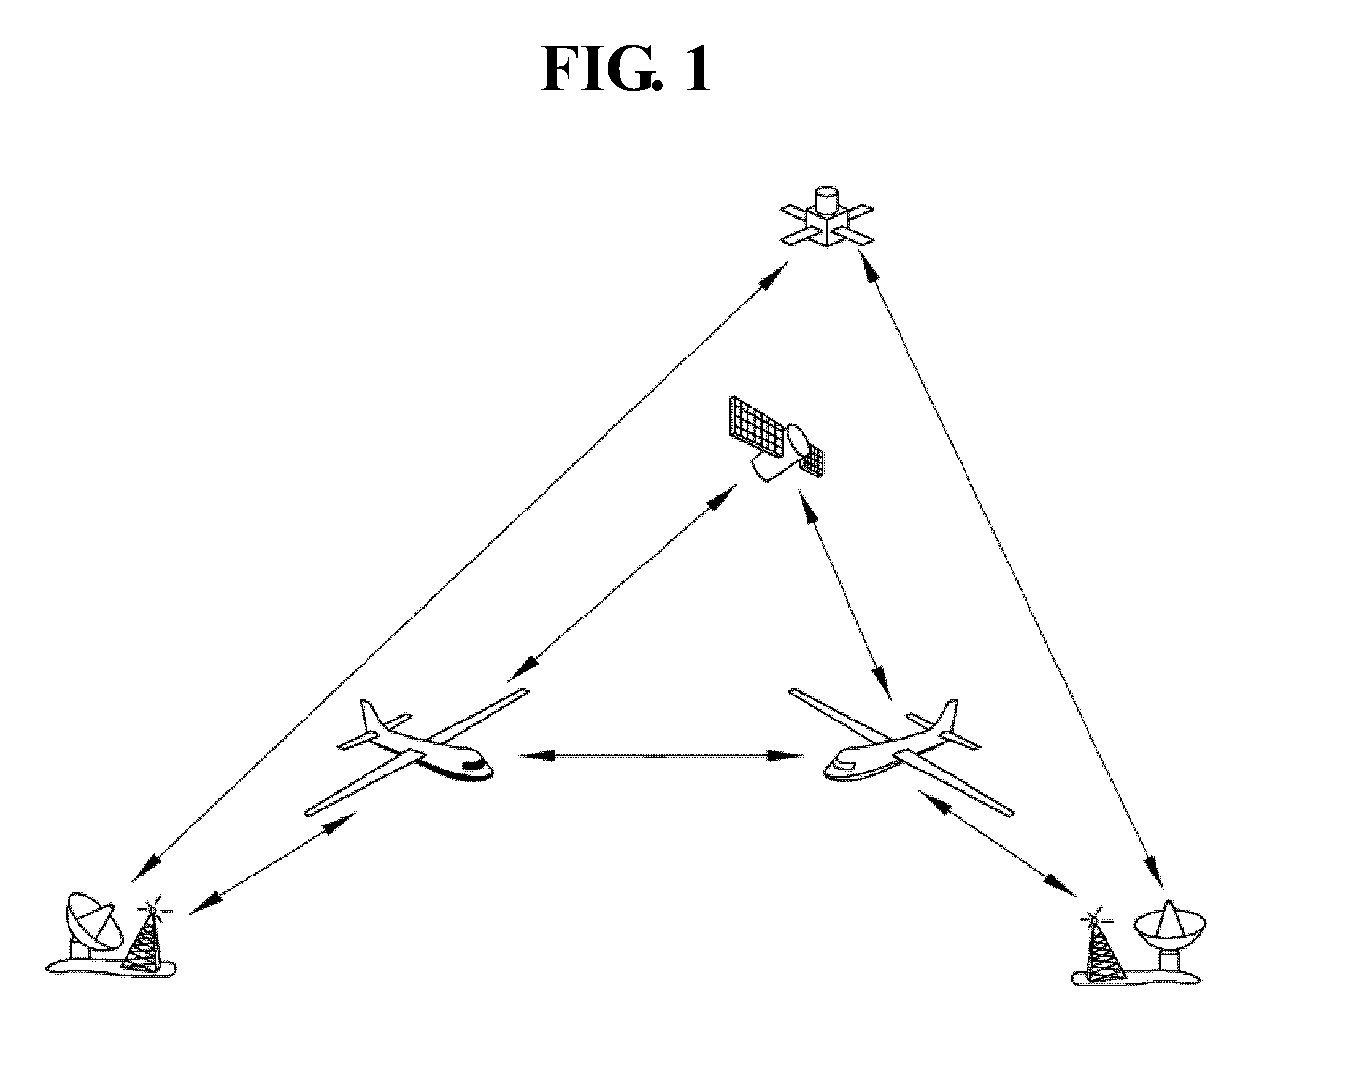 Detecting and localization method of unknown signal using aircraft with ads-b system